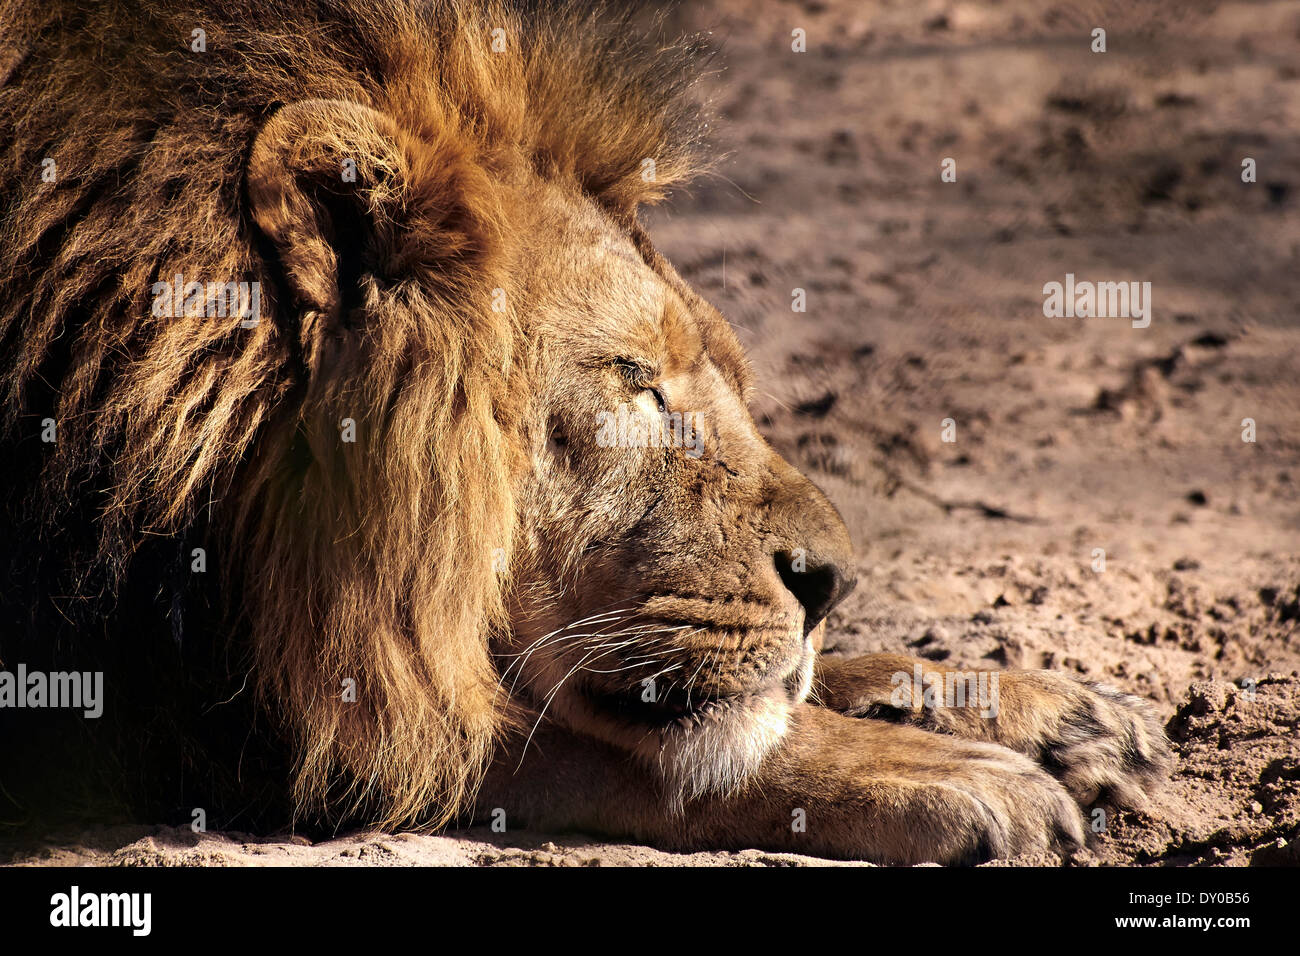 An adult male Lion relaxing Stock Photo